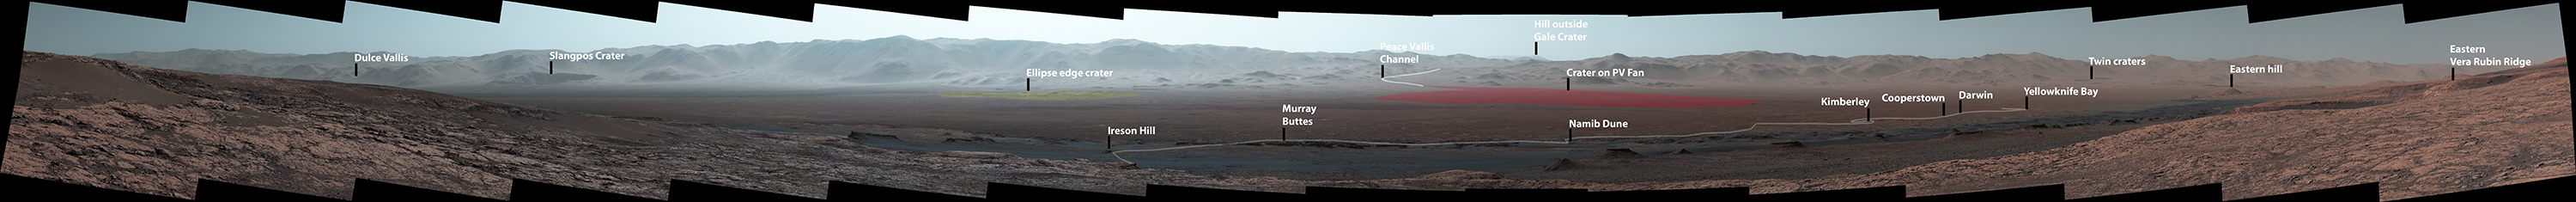 Wide-Angle Panorama from Ridge in Mars' Gale Crater (Labeled)